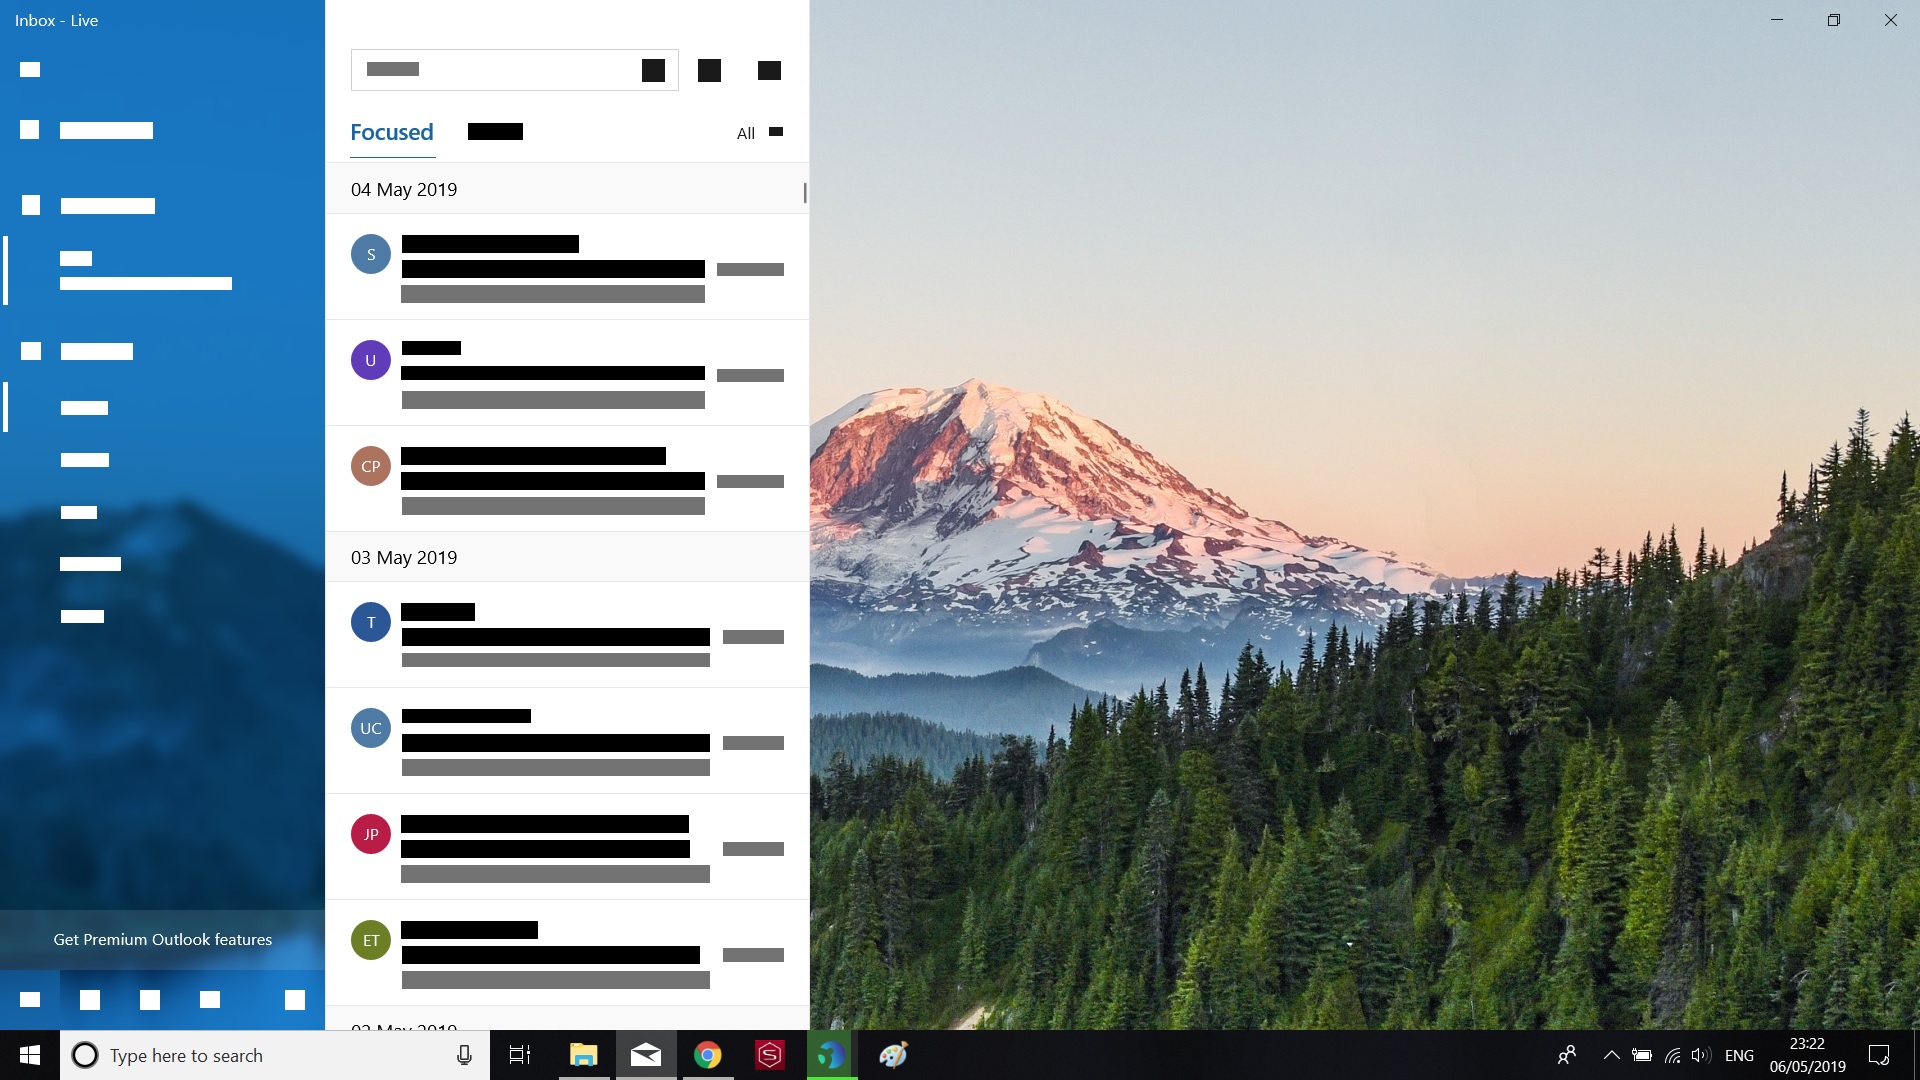 Black squares are blocking out parts of text in windows 10 after factory reset 421fa587-da74-44b7-a2a8-348513c5c76a?upload=true.jpg